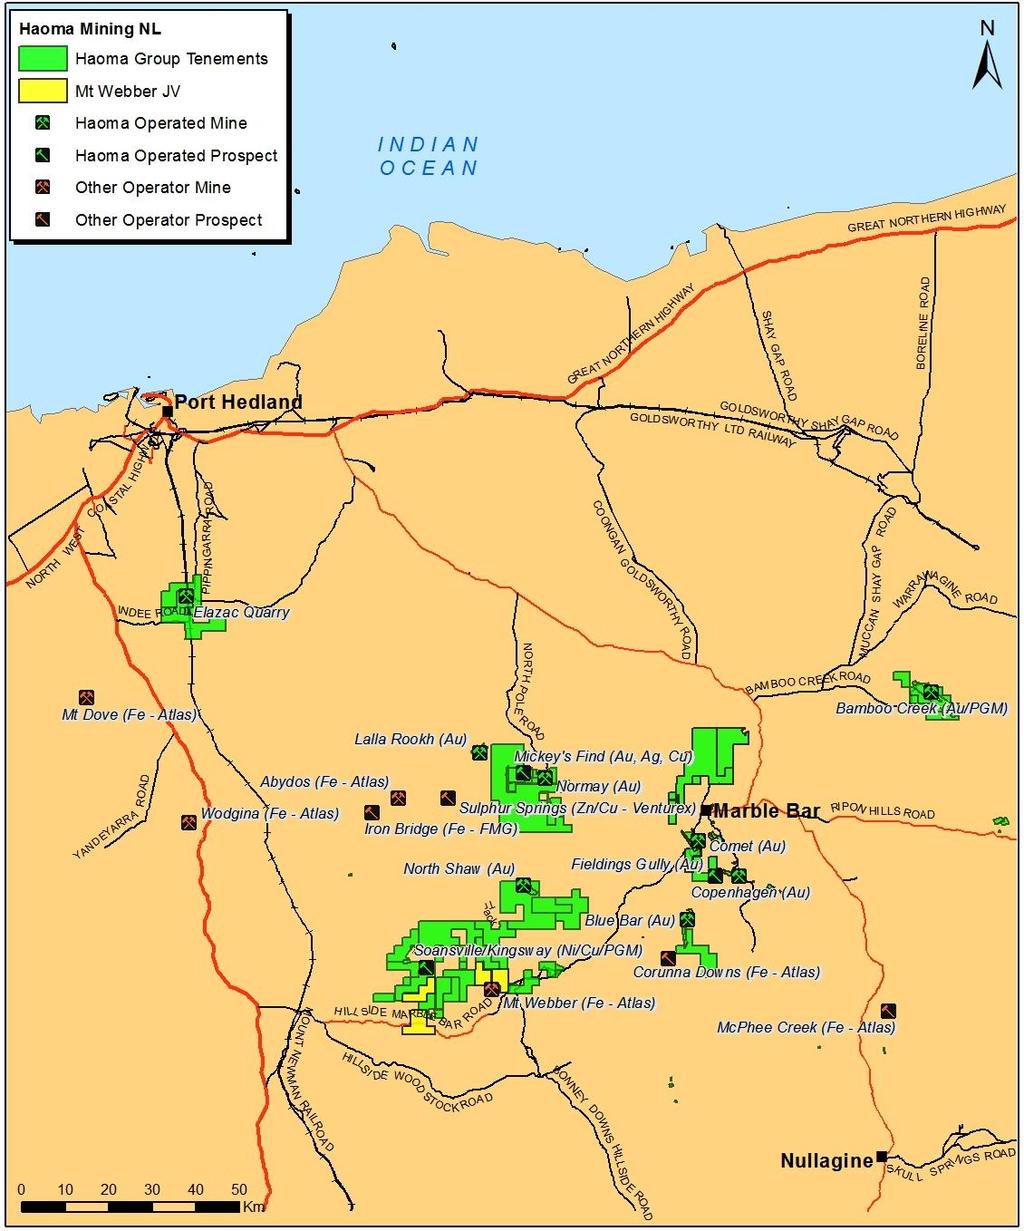 Figure 1: Location map of Haoma Mining and other Pilbara mining locations.